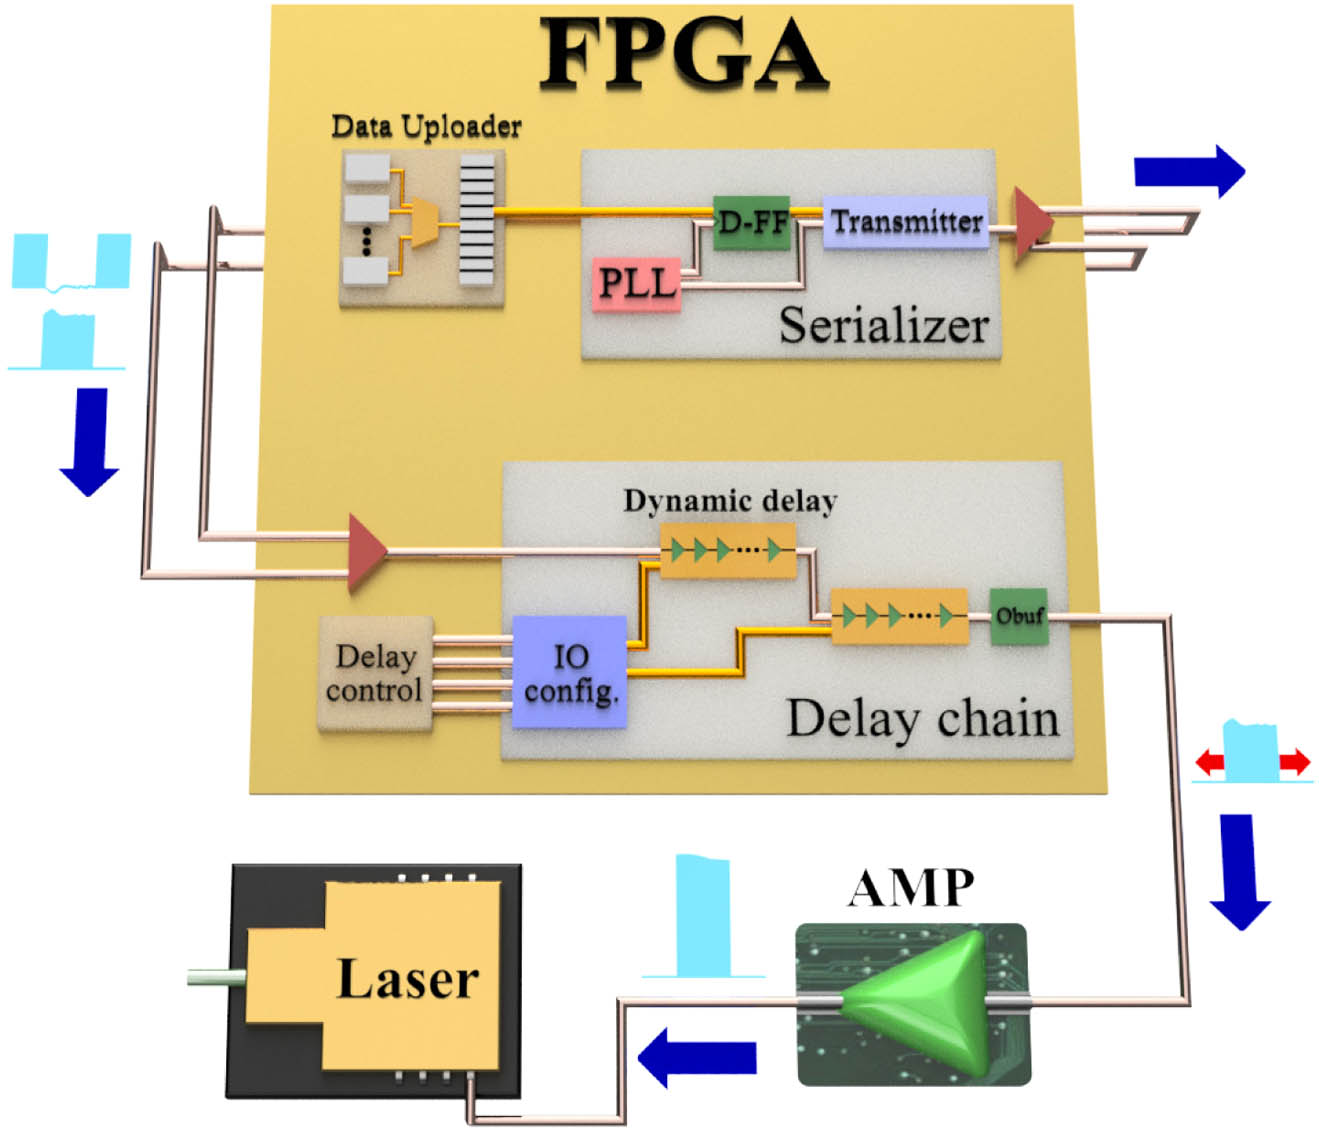 Timing control module based on an FPGA for one user. The arrows indicate the flow of the signal for generating laser pulses.